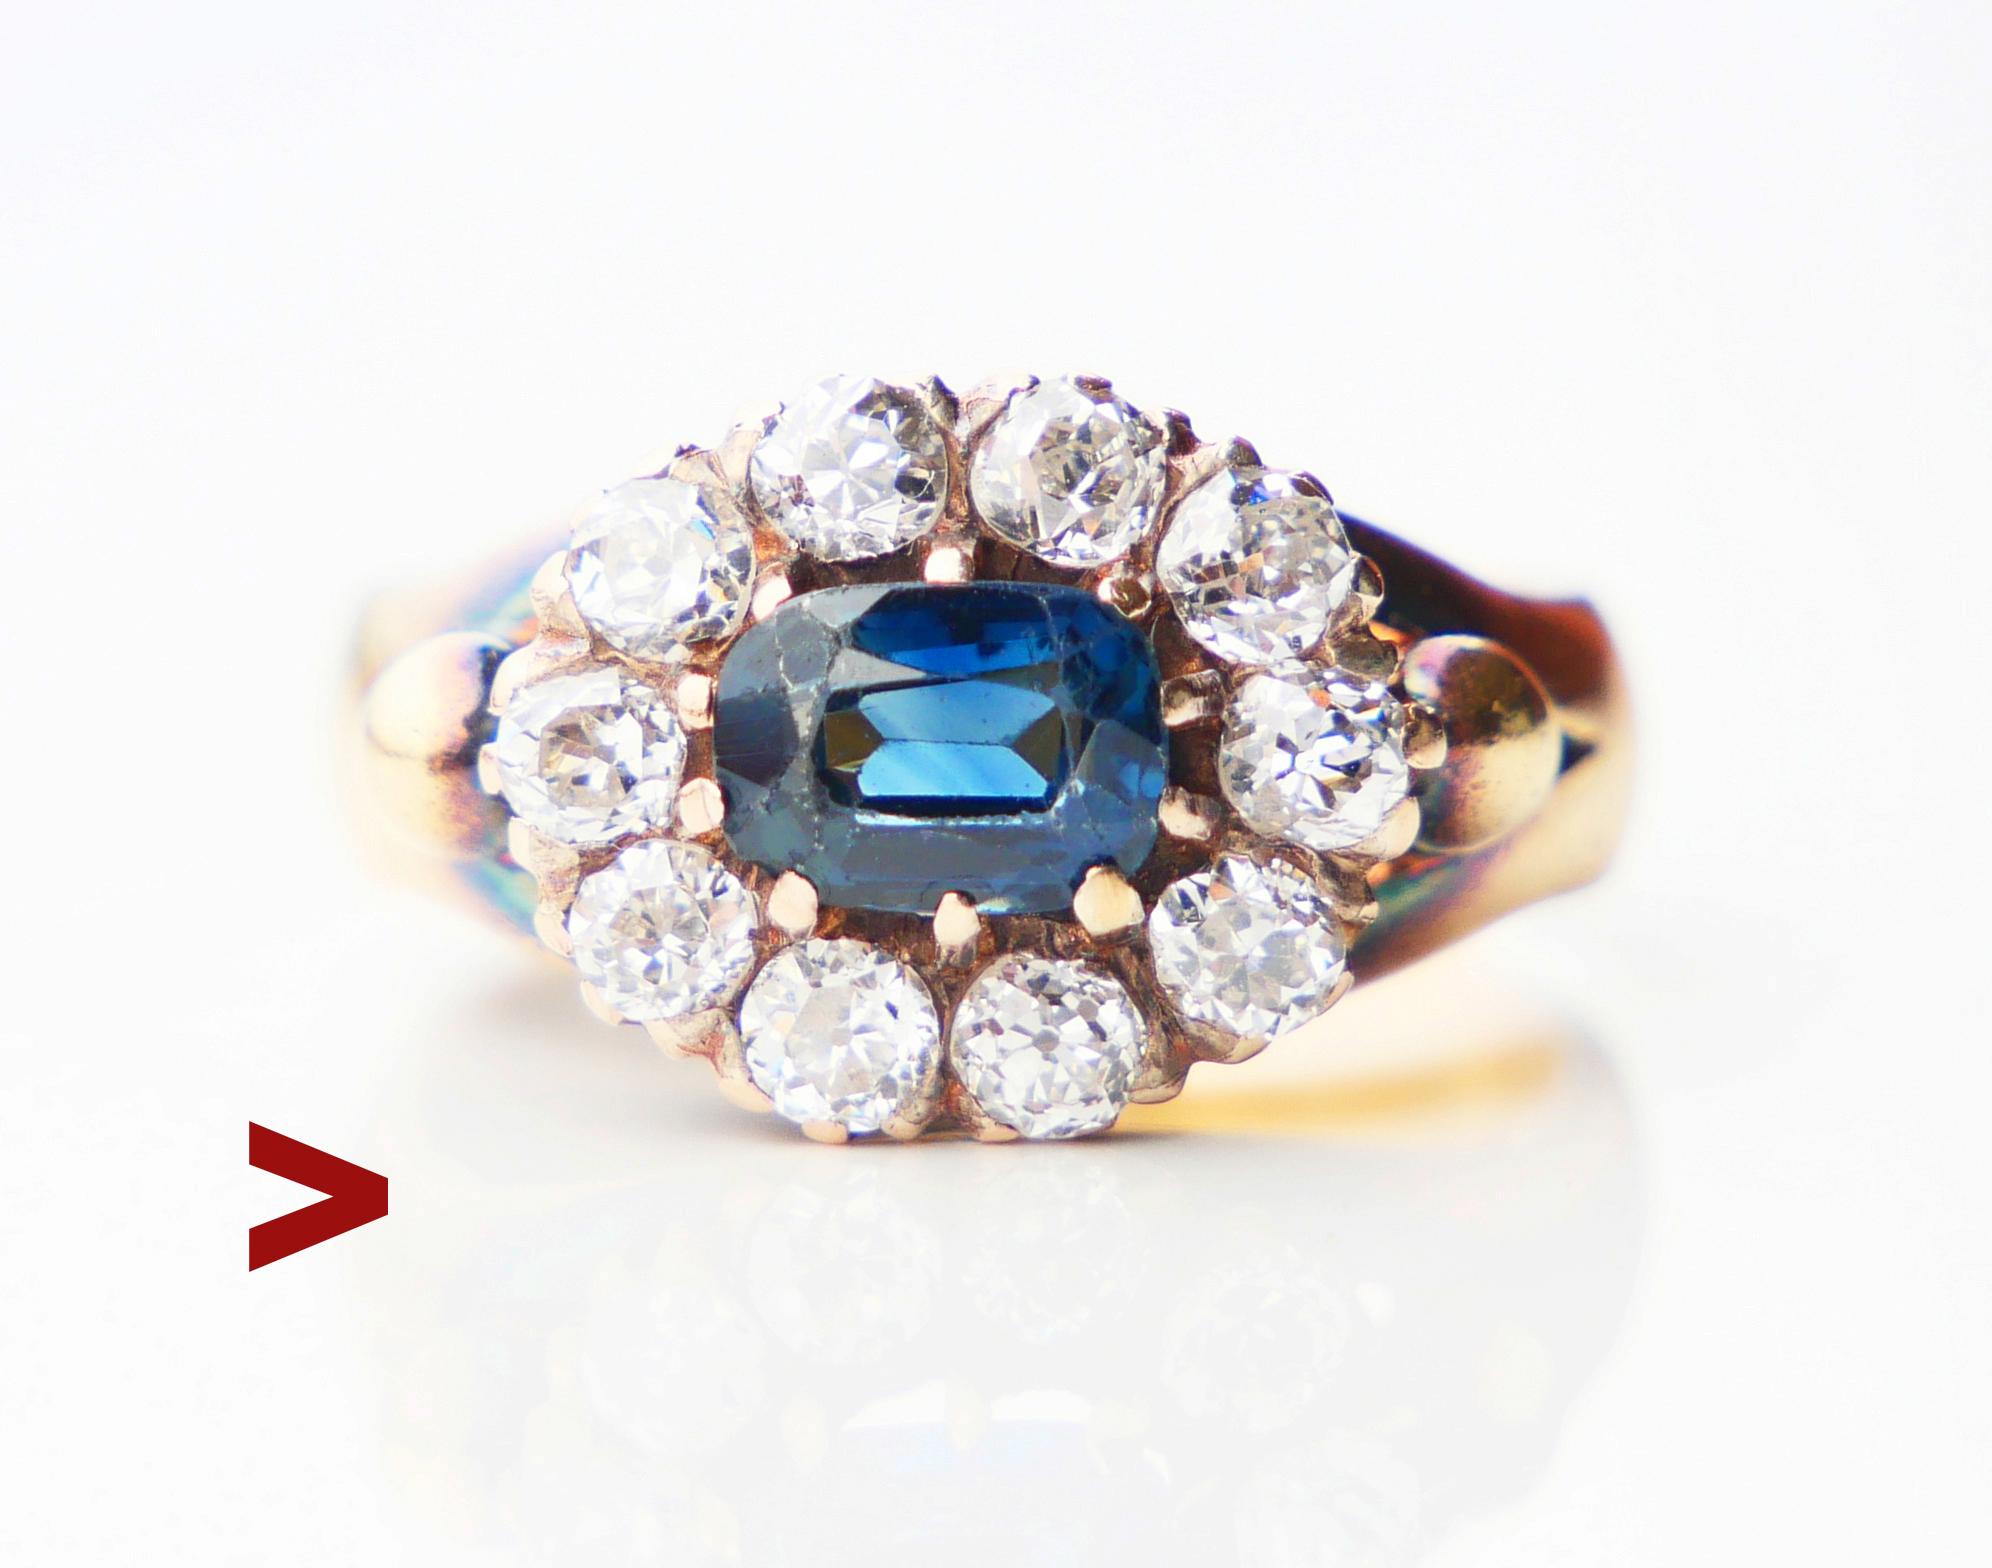 Beautiful old Halo Ring, band, and crown in solid 18K Gold featuring natural Blue Sapphire and 10 old European cut Diamonds.

This ring originates from DK, hand-made ca. 1920s -1930s. Not hallmarked, metal tested 18K.

Crown measures  13mm x 11mm x